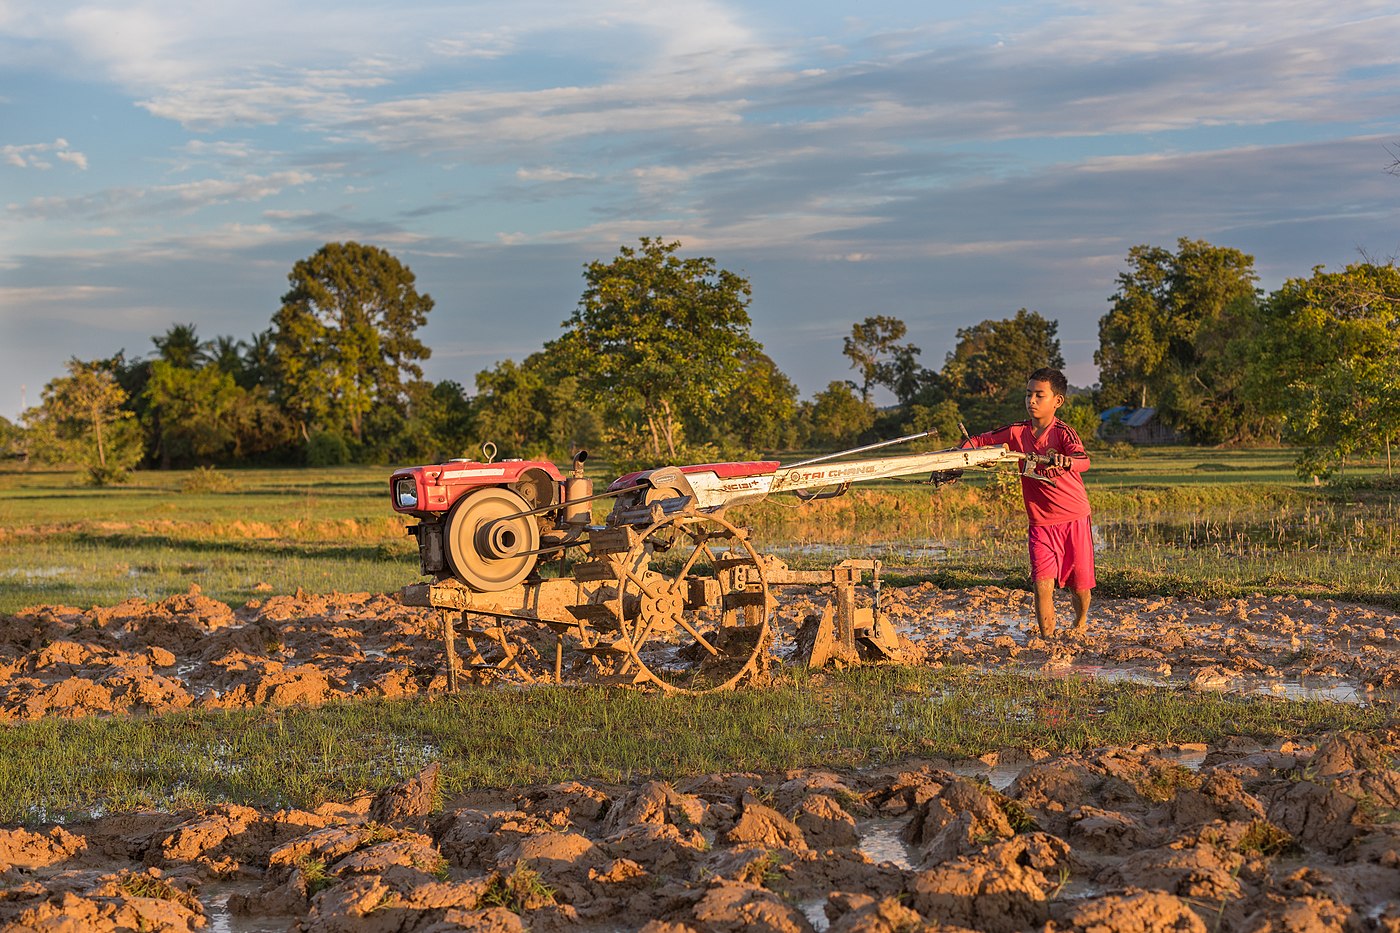 Boy wearing red clothing driving a tractor to plow a paddy field